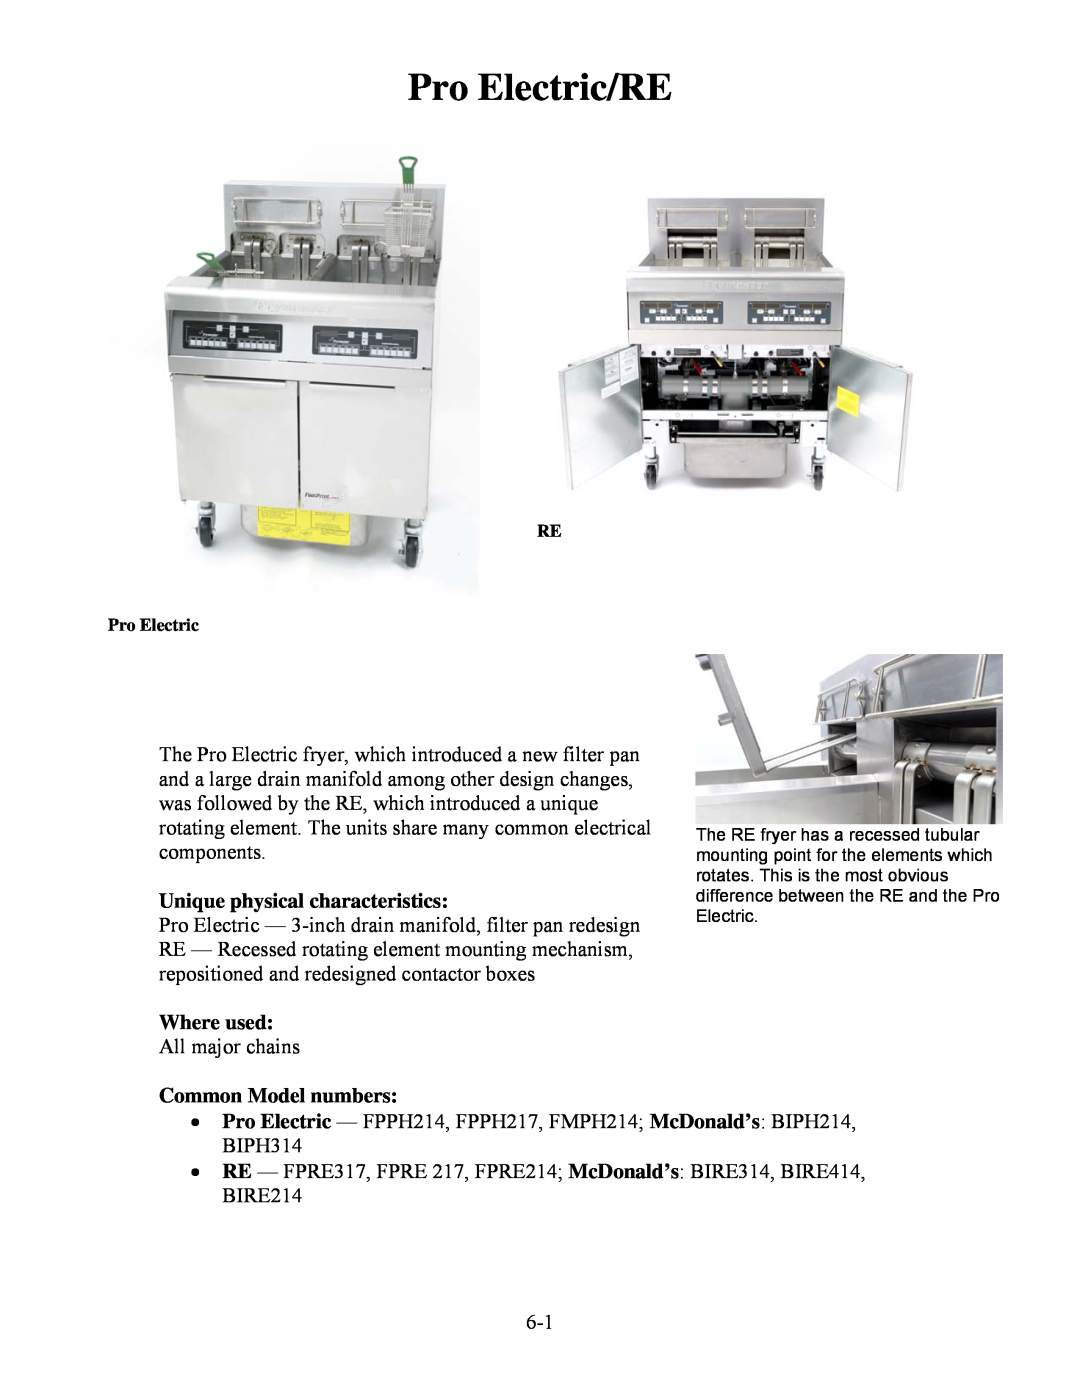 Frymaster H55 manual Pro Electric/RE, Unique physical characteristics, Where used, Common Model numbers 